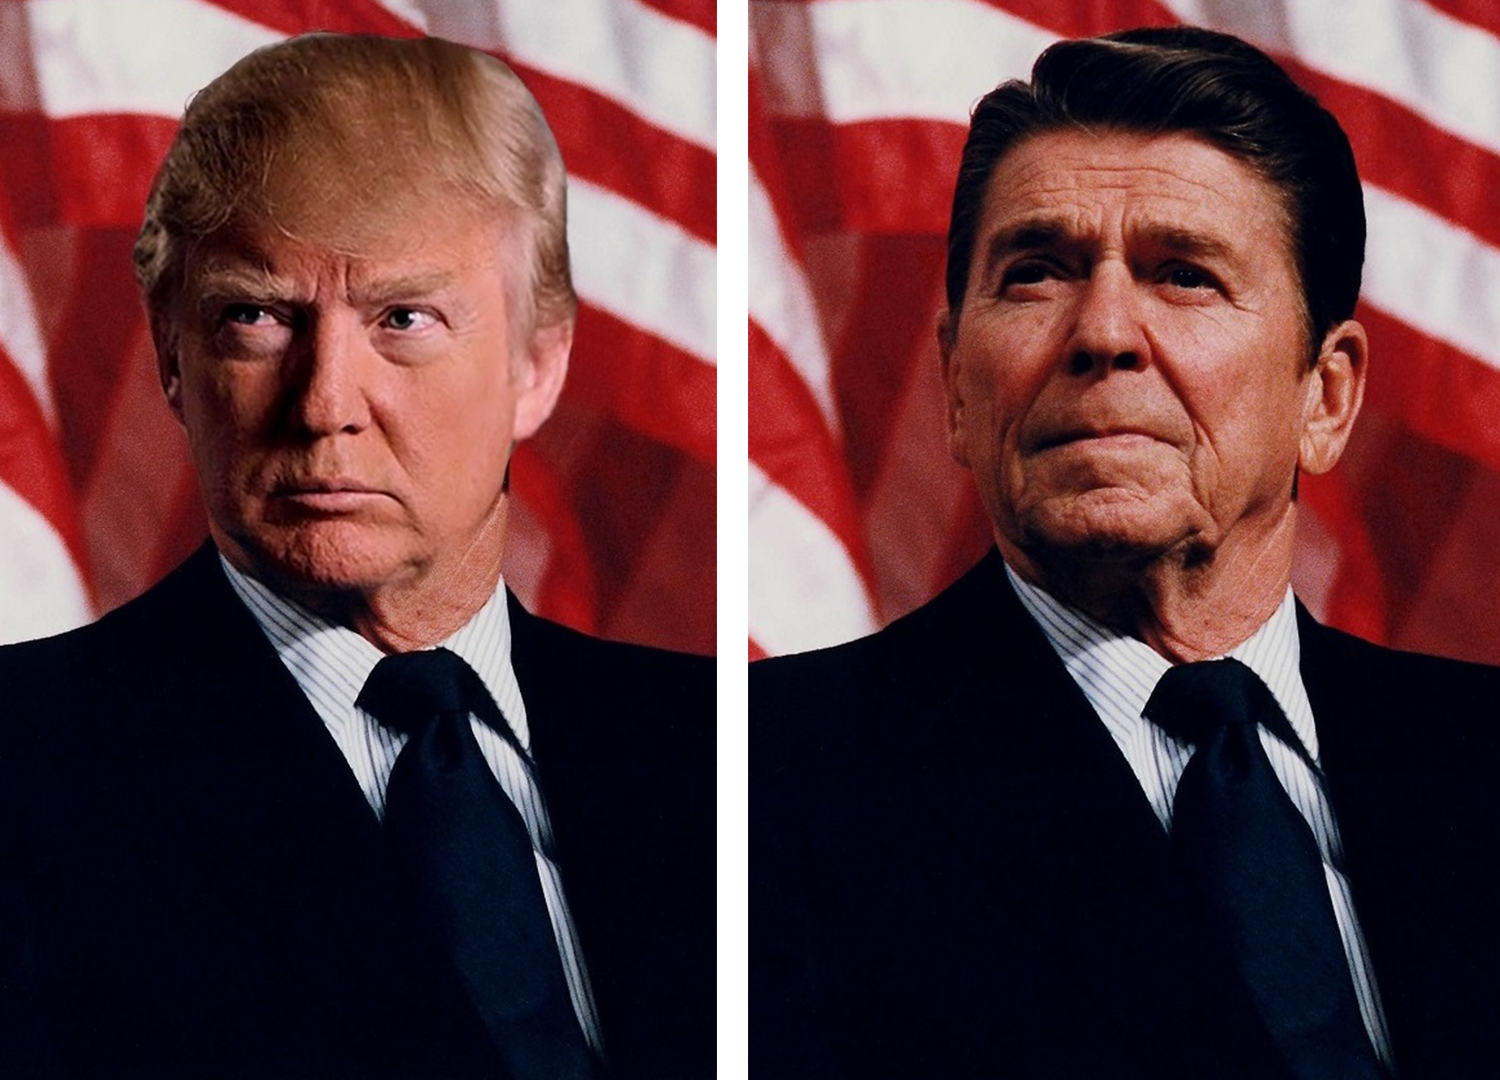 Trump A Fascist? NOPE, They Said The Same Thing About Reagan! - Conservative ...1500 x 1080